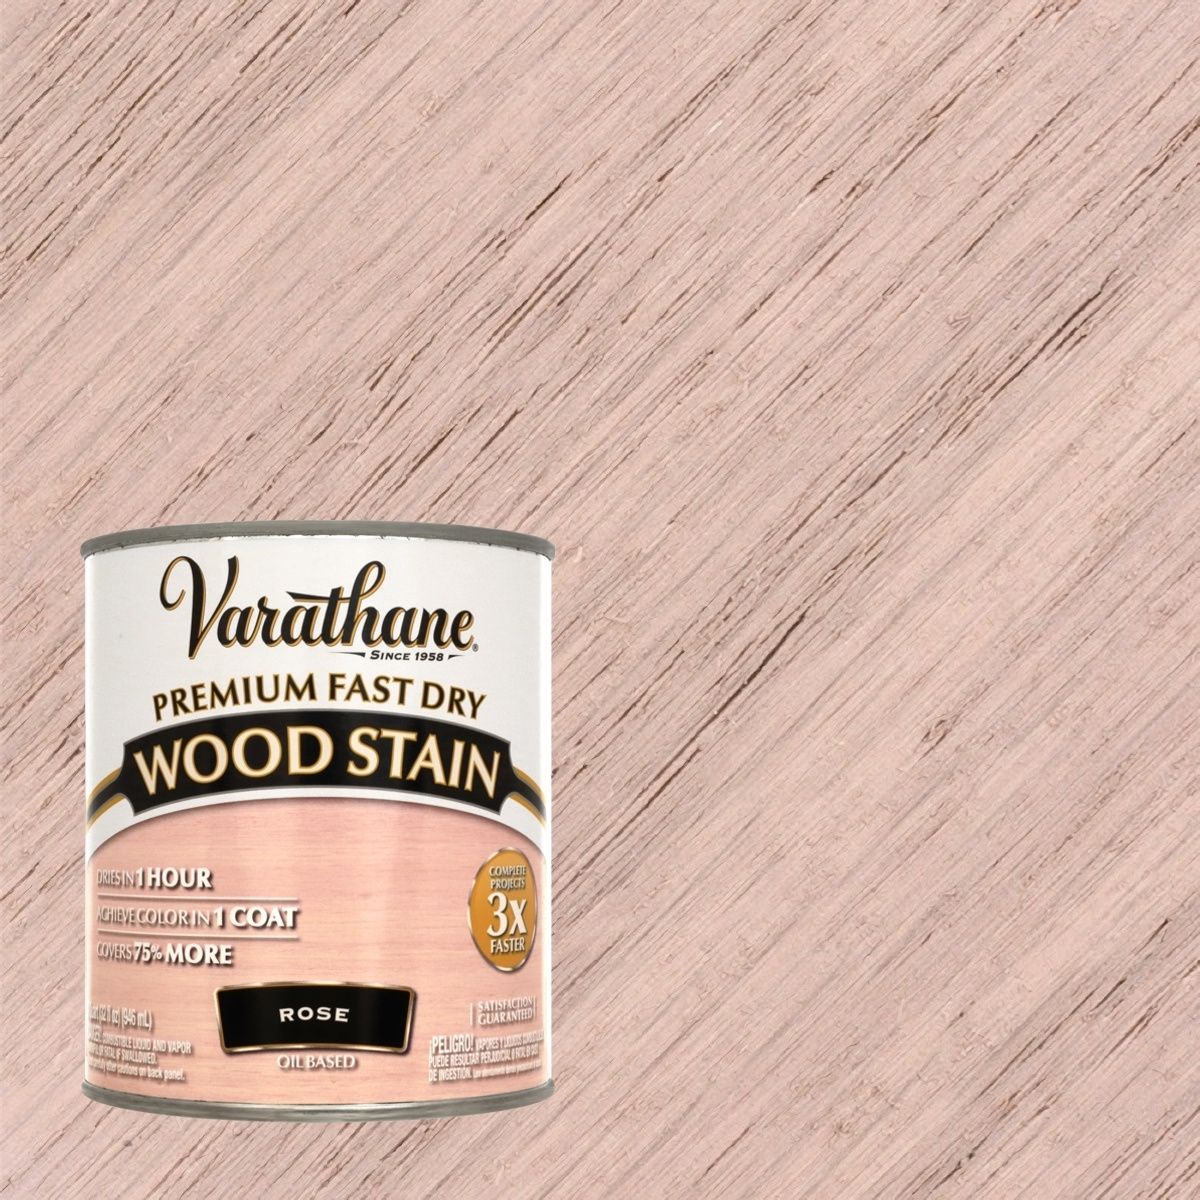 Масло Varathane fast Dry Wood Stain сост. Морской 0,946 л.. Масло Varathane fast Dry Wood Stain вишня 0,236 л.. Varathane пепельная Ива.